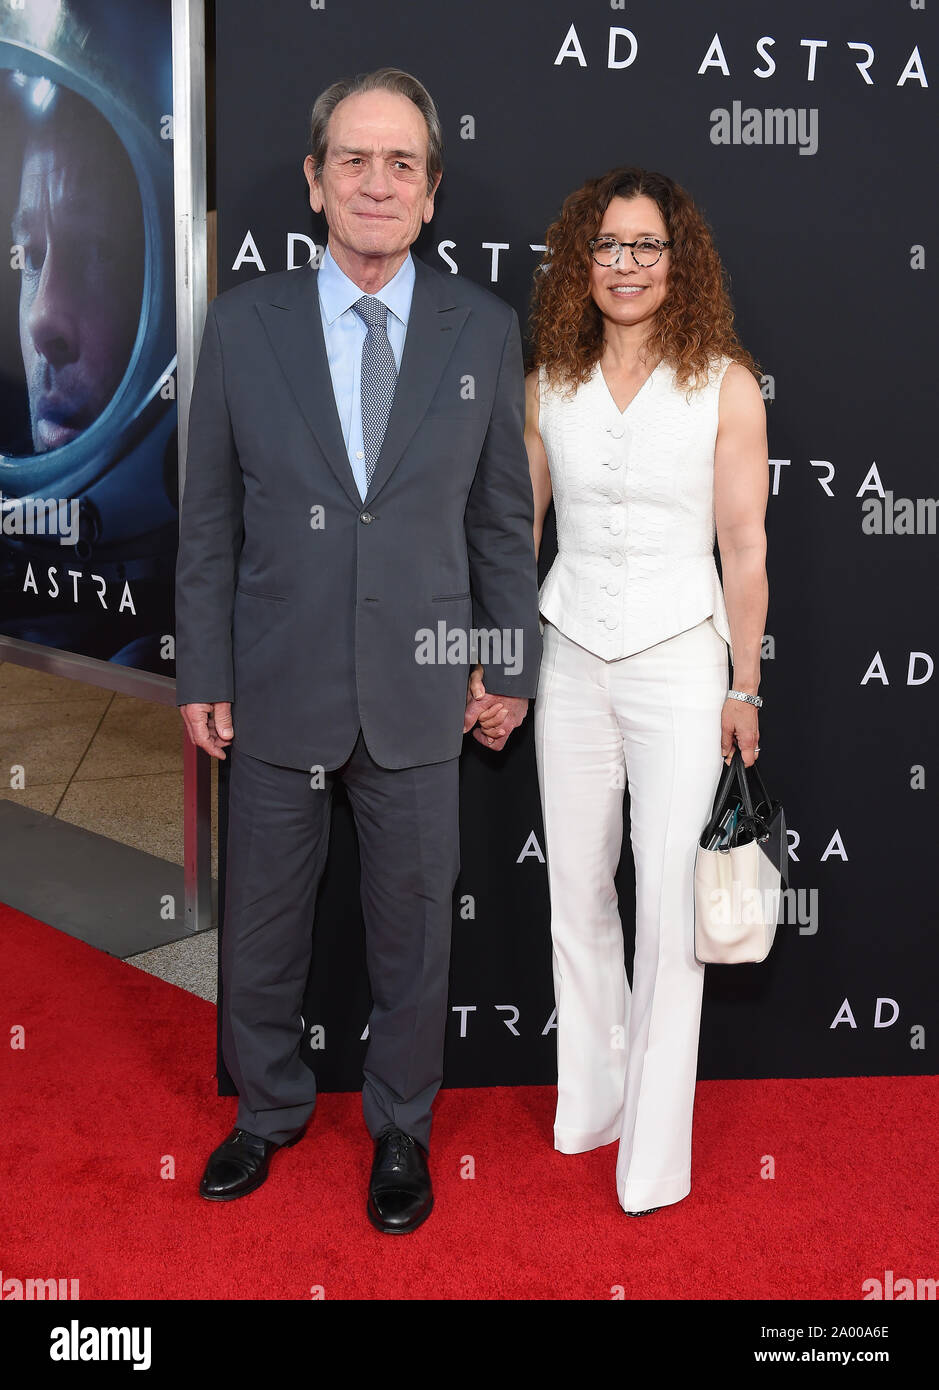 September 18, 2019, Hollywood, California, USA: Tommy Lee Jones and Dawn Laurel-Jones arrives for the 'Ad Astra' Special Screening at the Cinerama Dome. (Credit Image: © Lisa O'Connor/ZUMA Wire) Stock Photo